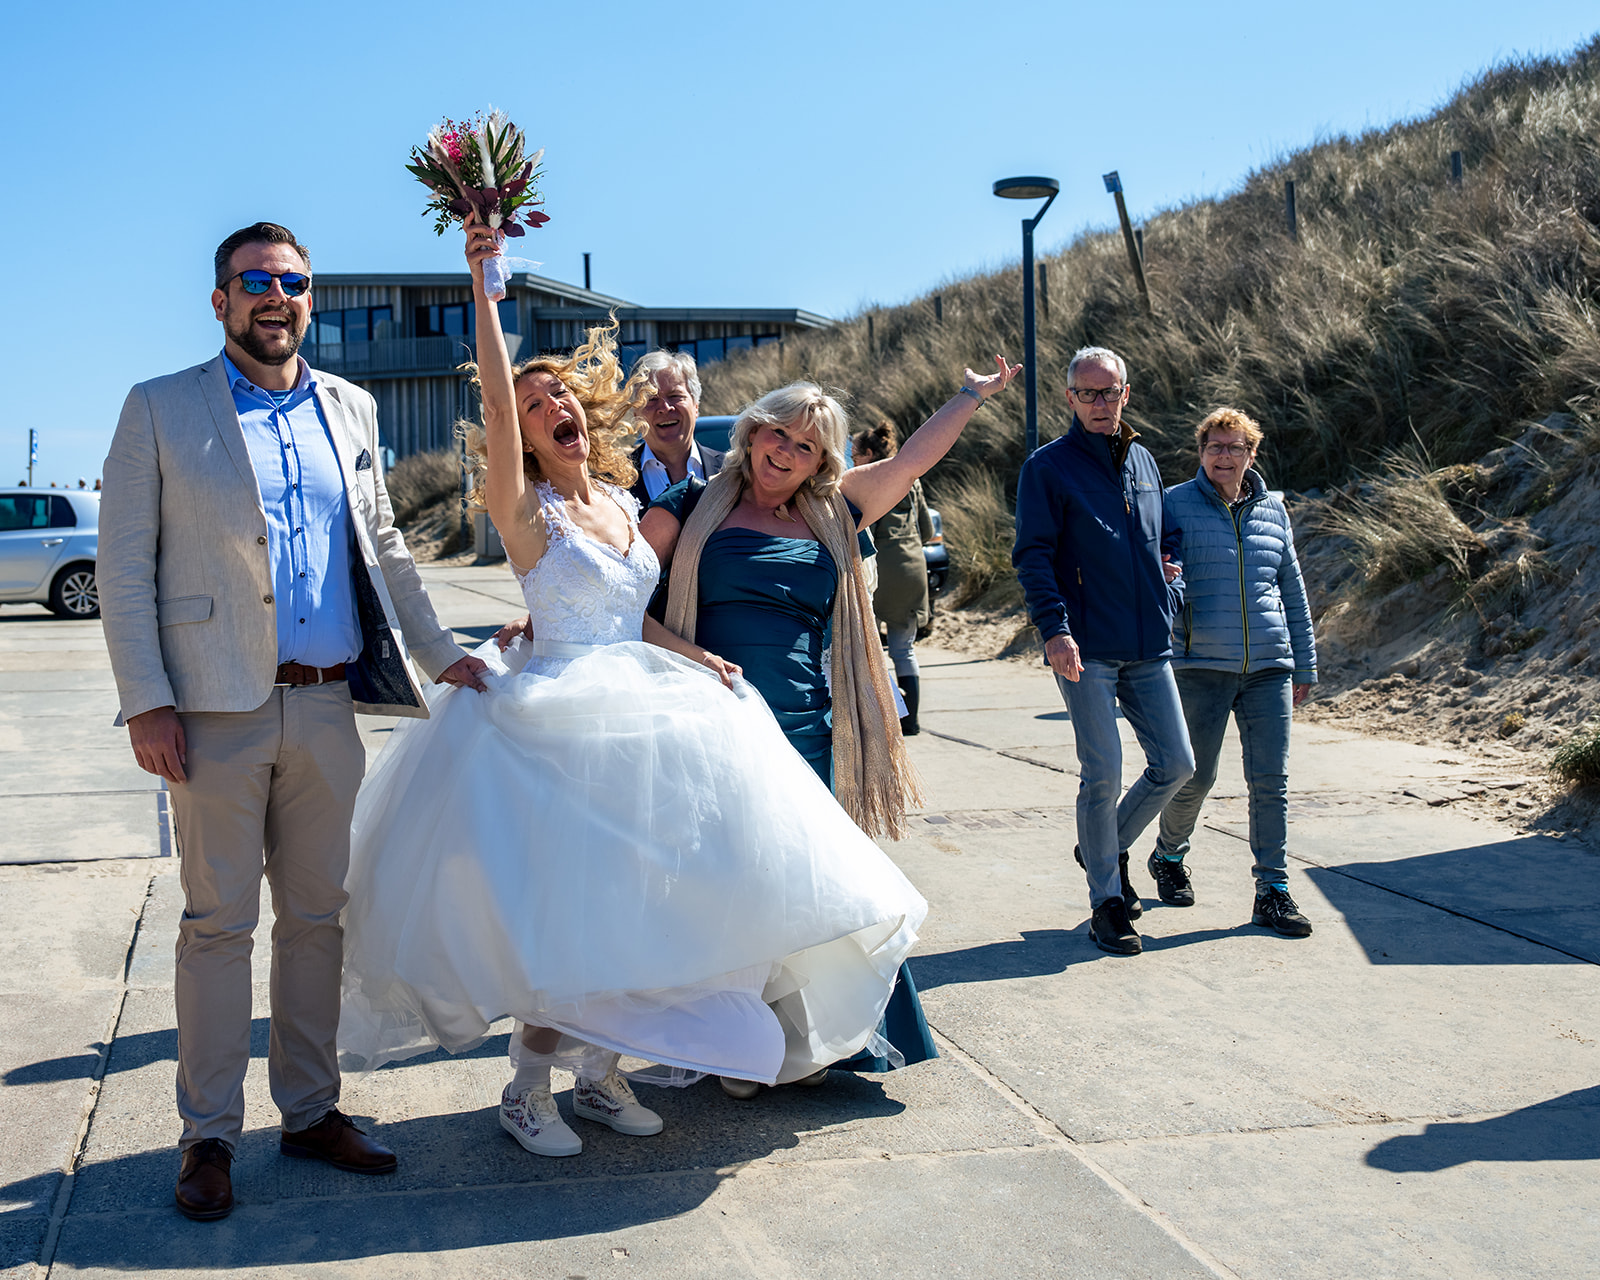 Bride arriving at the beach side on her wedding day. Celebrating at Club Zand in Castricum aan Zee